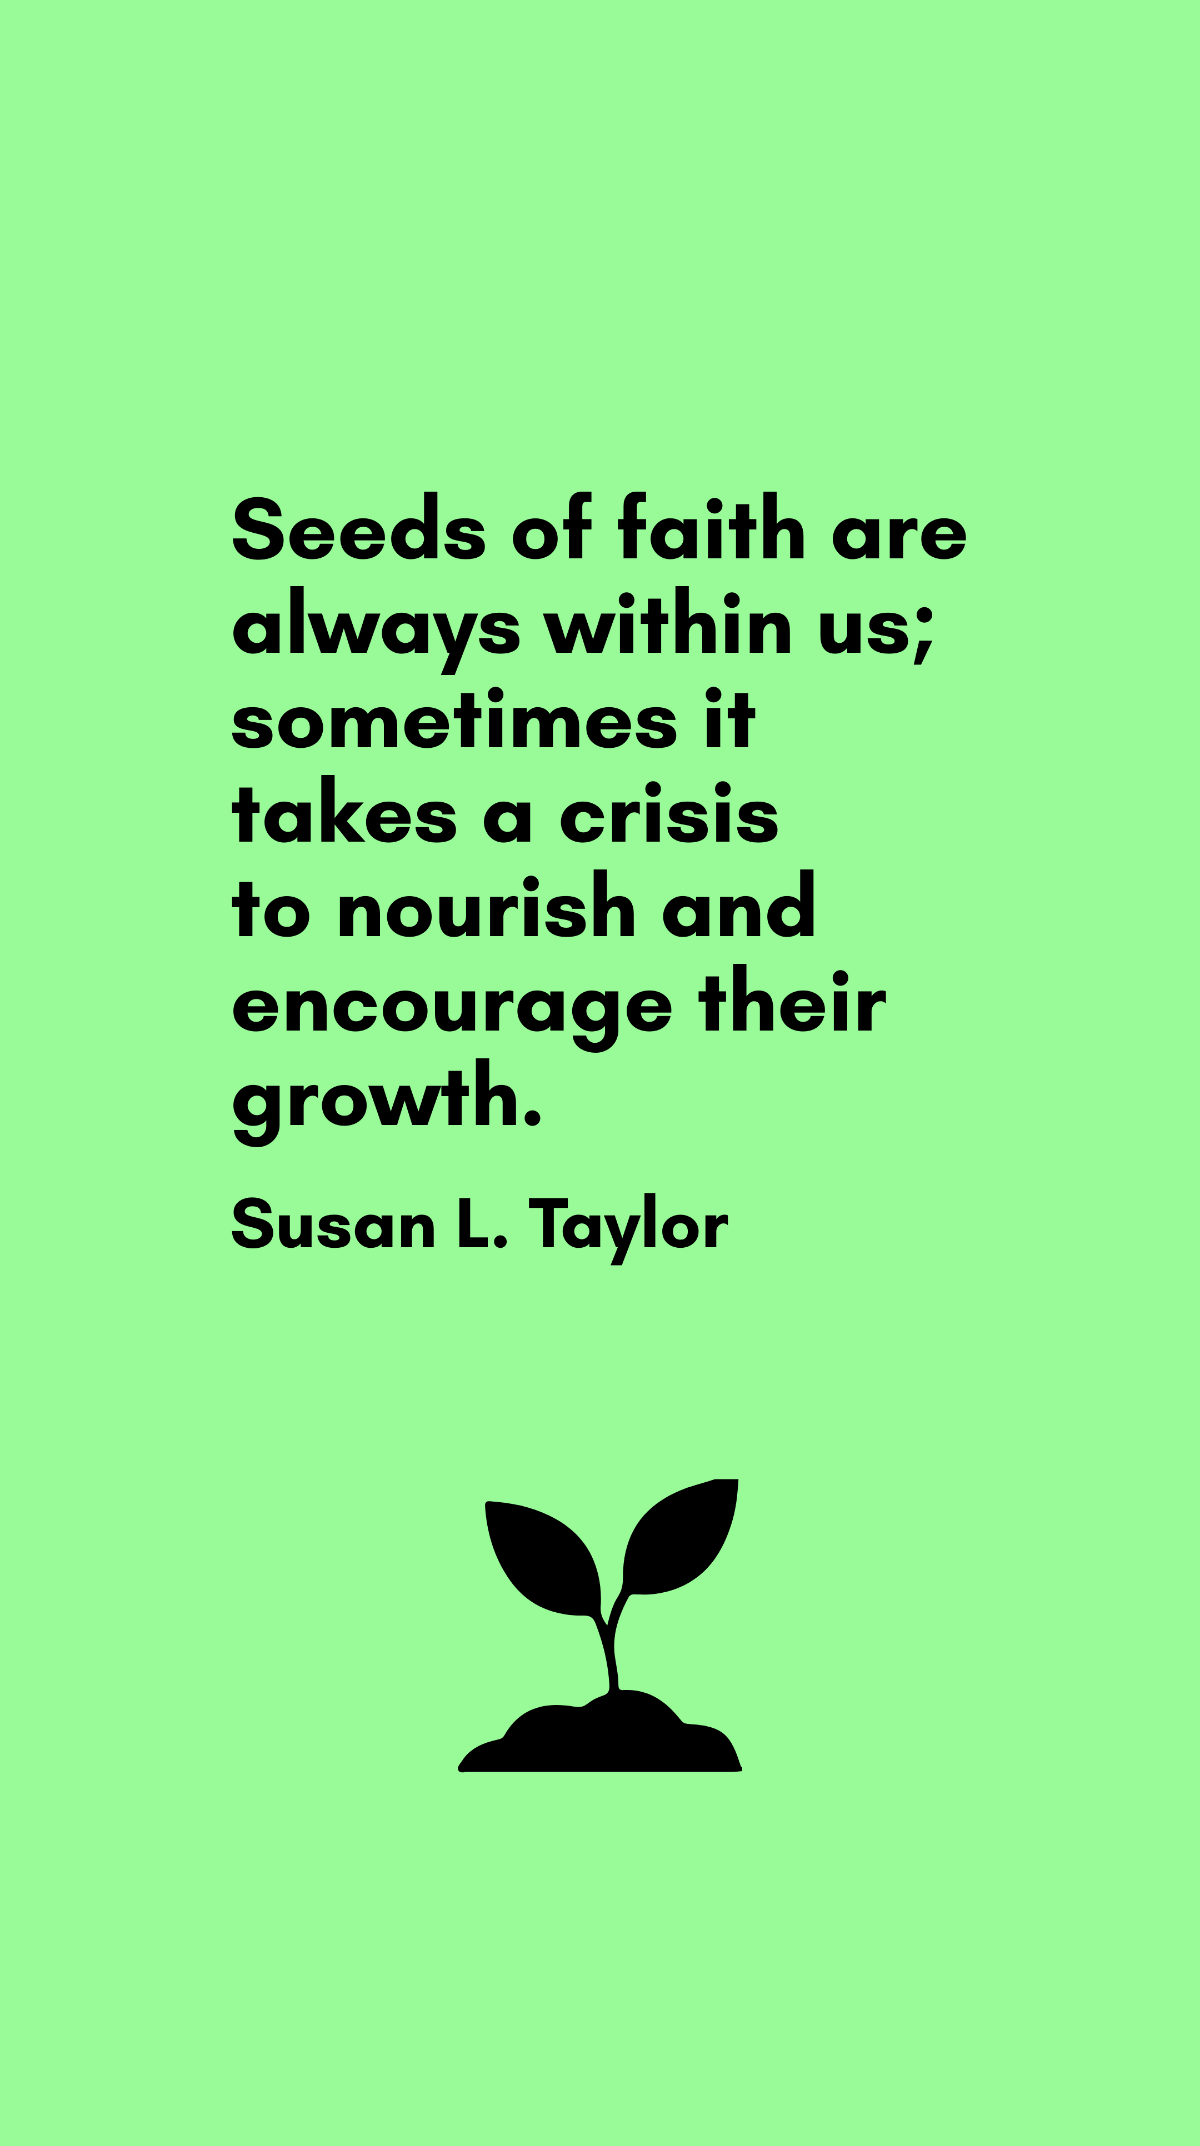 Susan L. Taylor - Seeds of faith are always within us; sometimes it takes a crisis to nourish and encourage their growth. Template